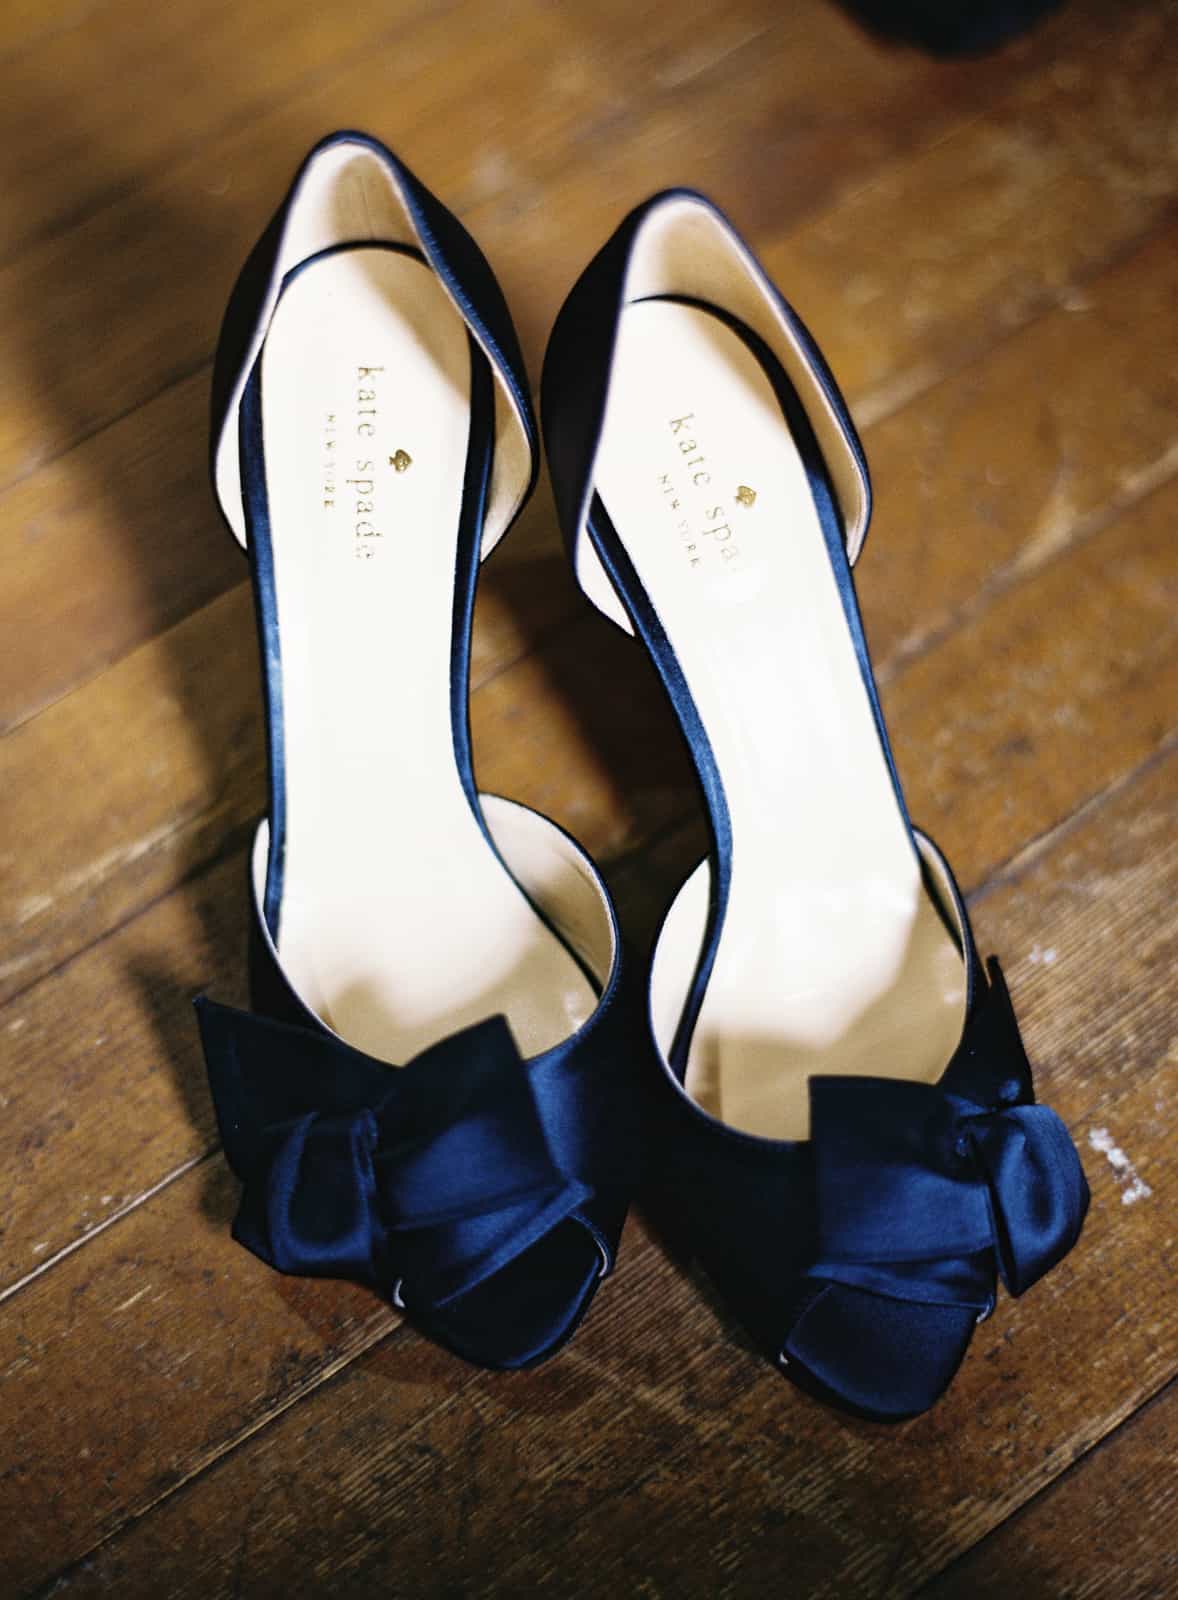 blue kate spade shoes with a blue bow